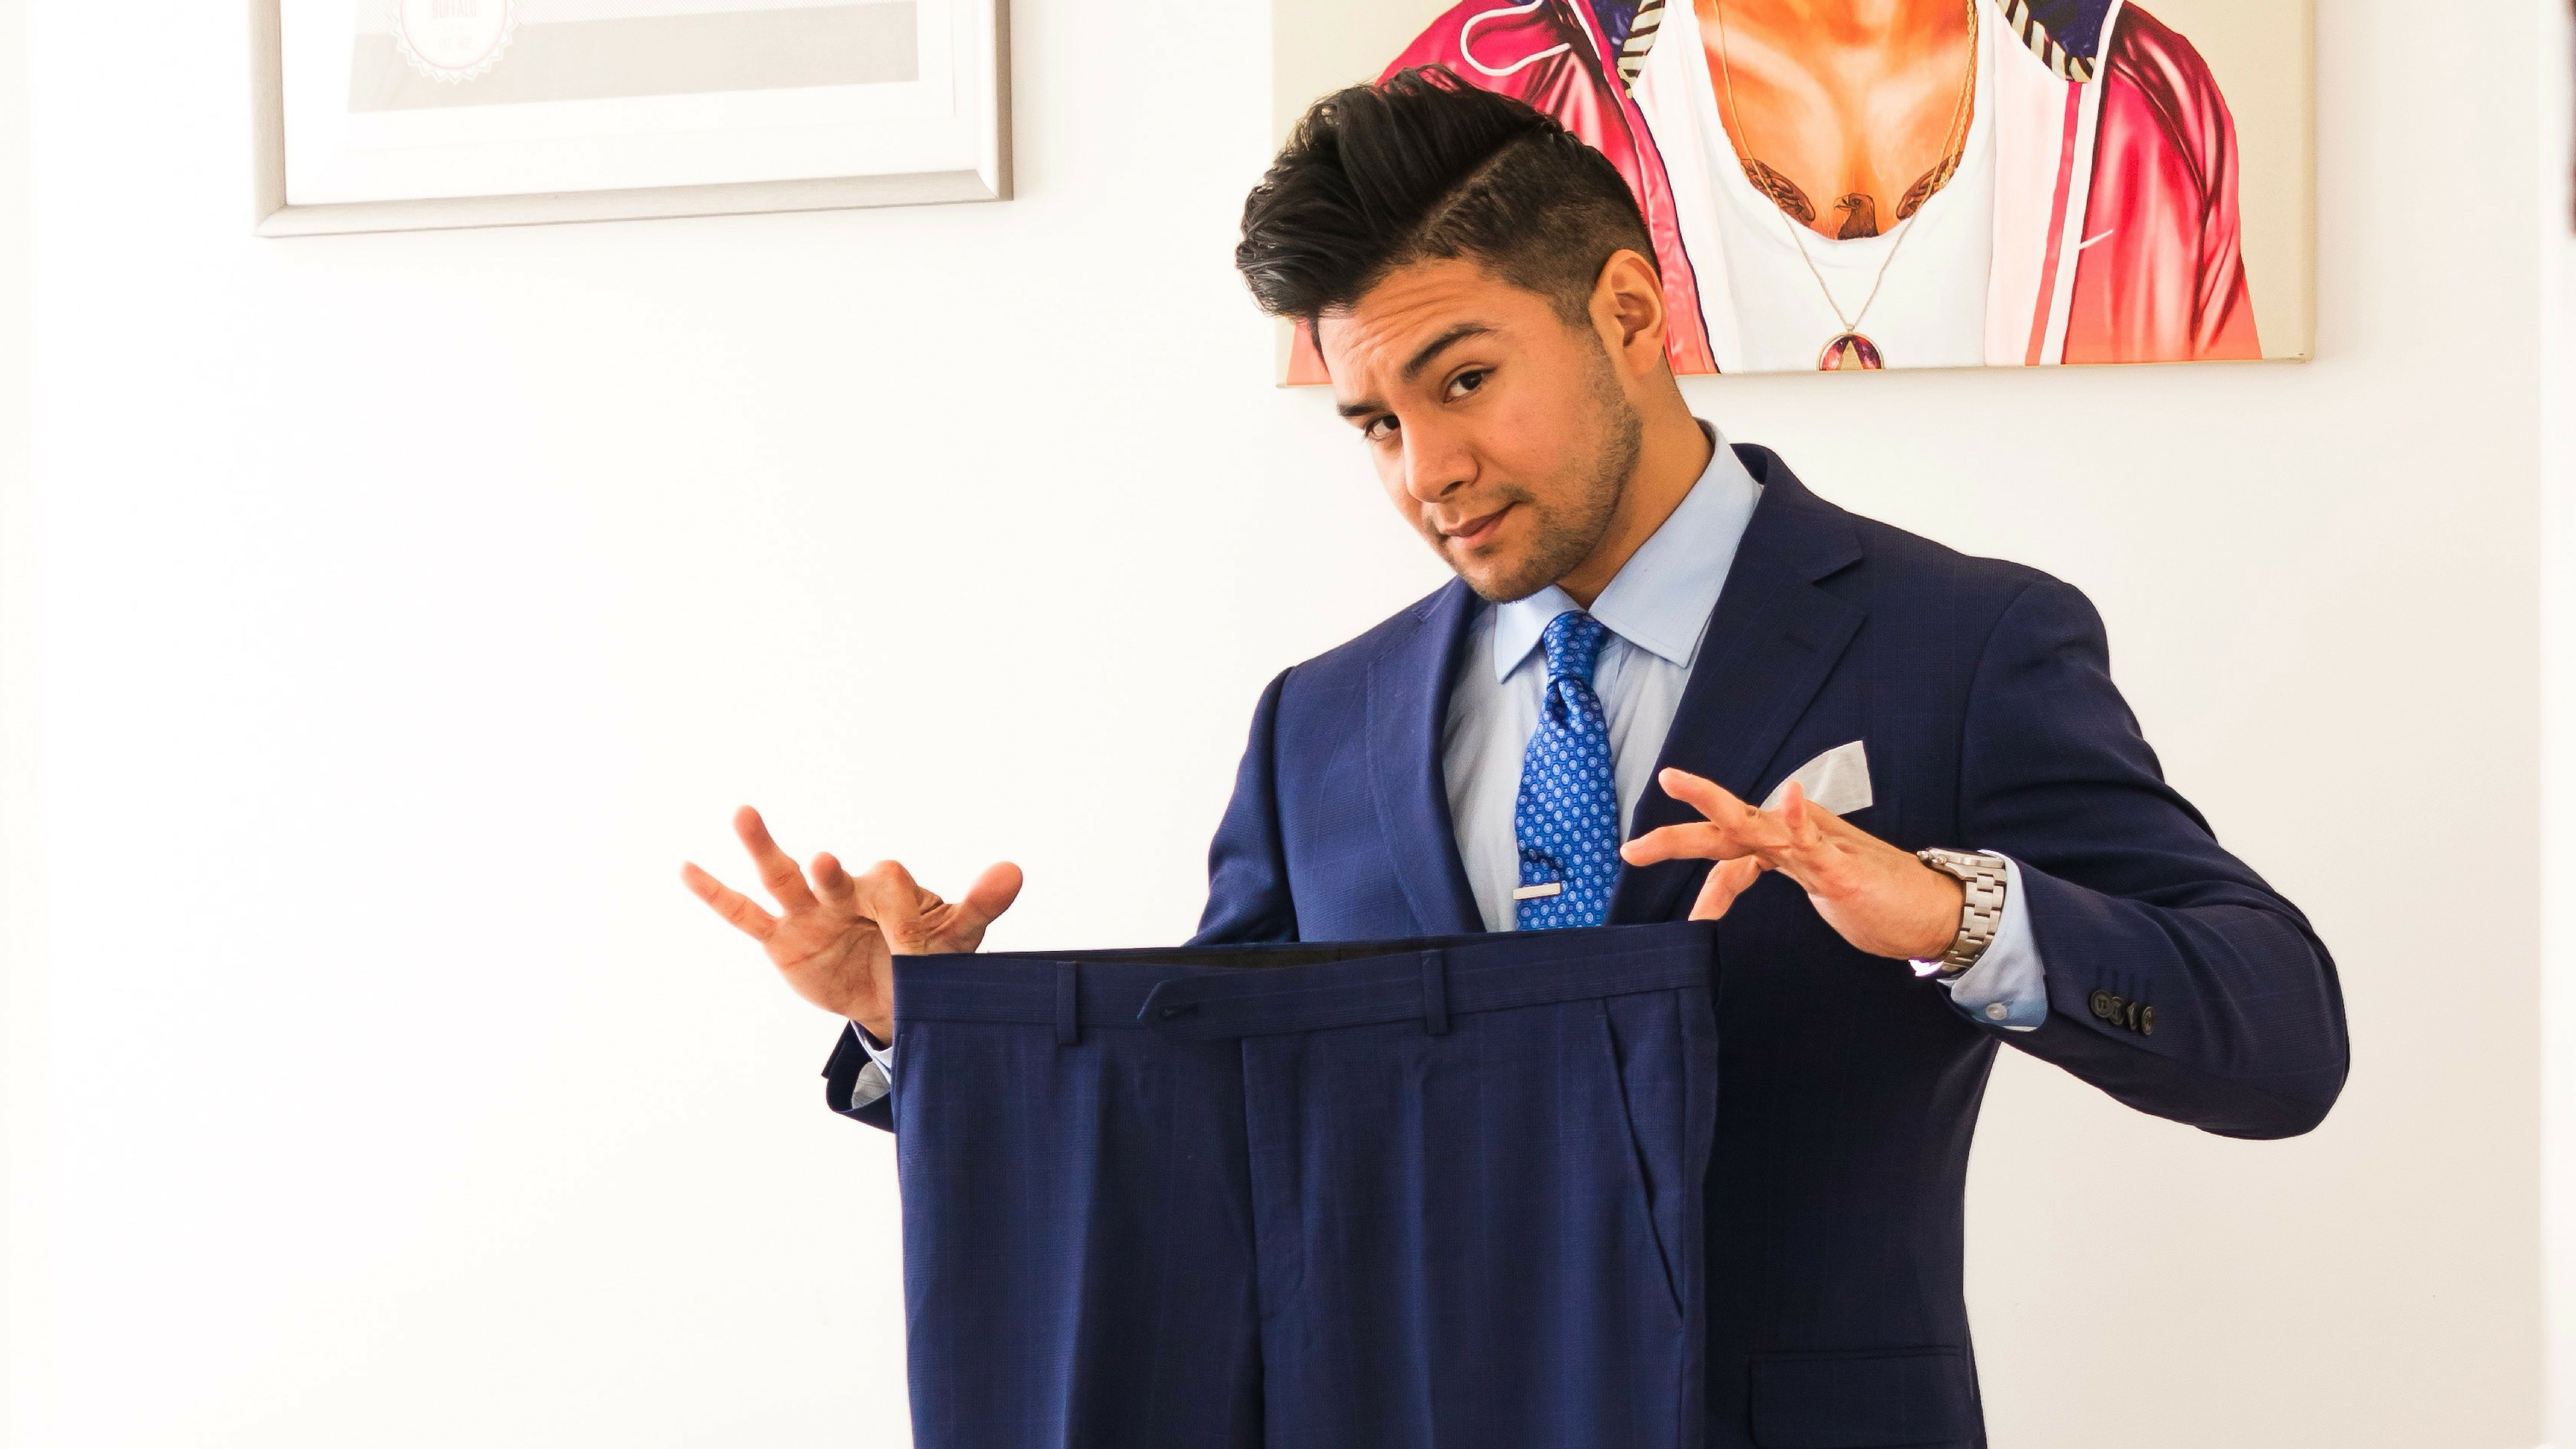 HOW TO GET YOUR SUIT PROPERLY TAILORED - dandy in the bronx